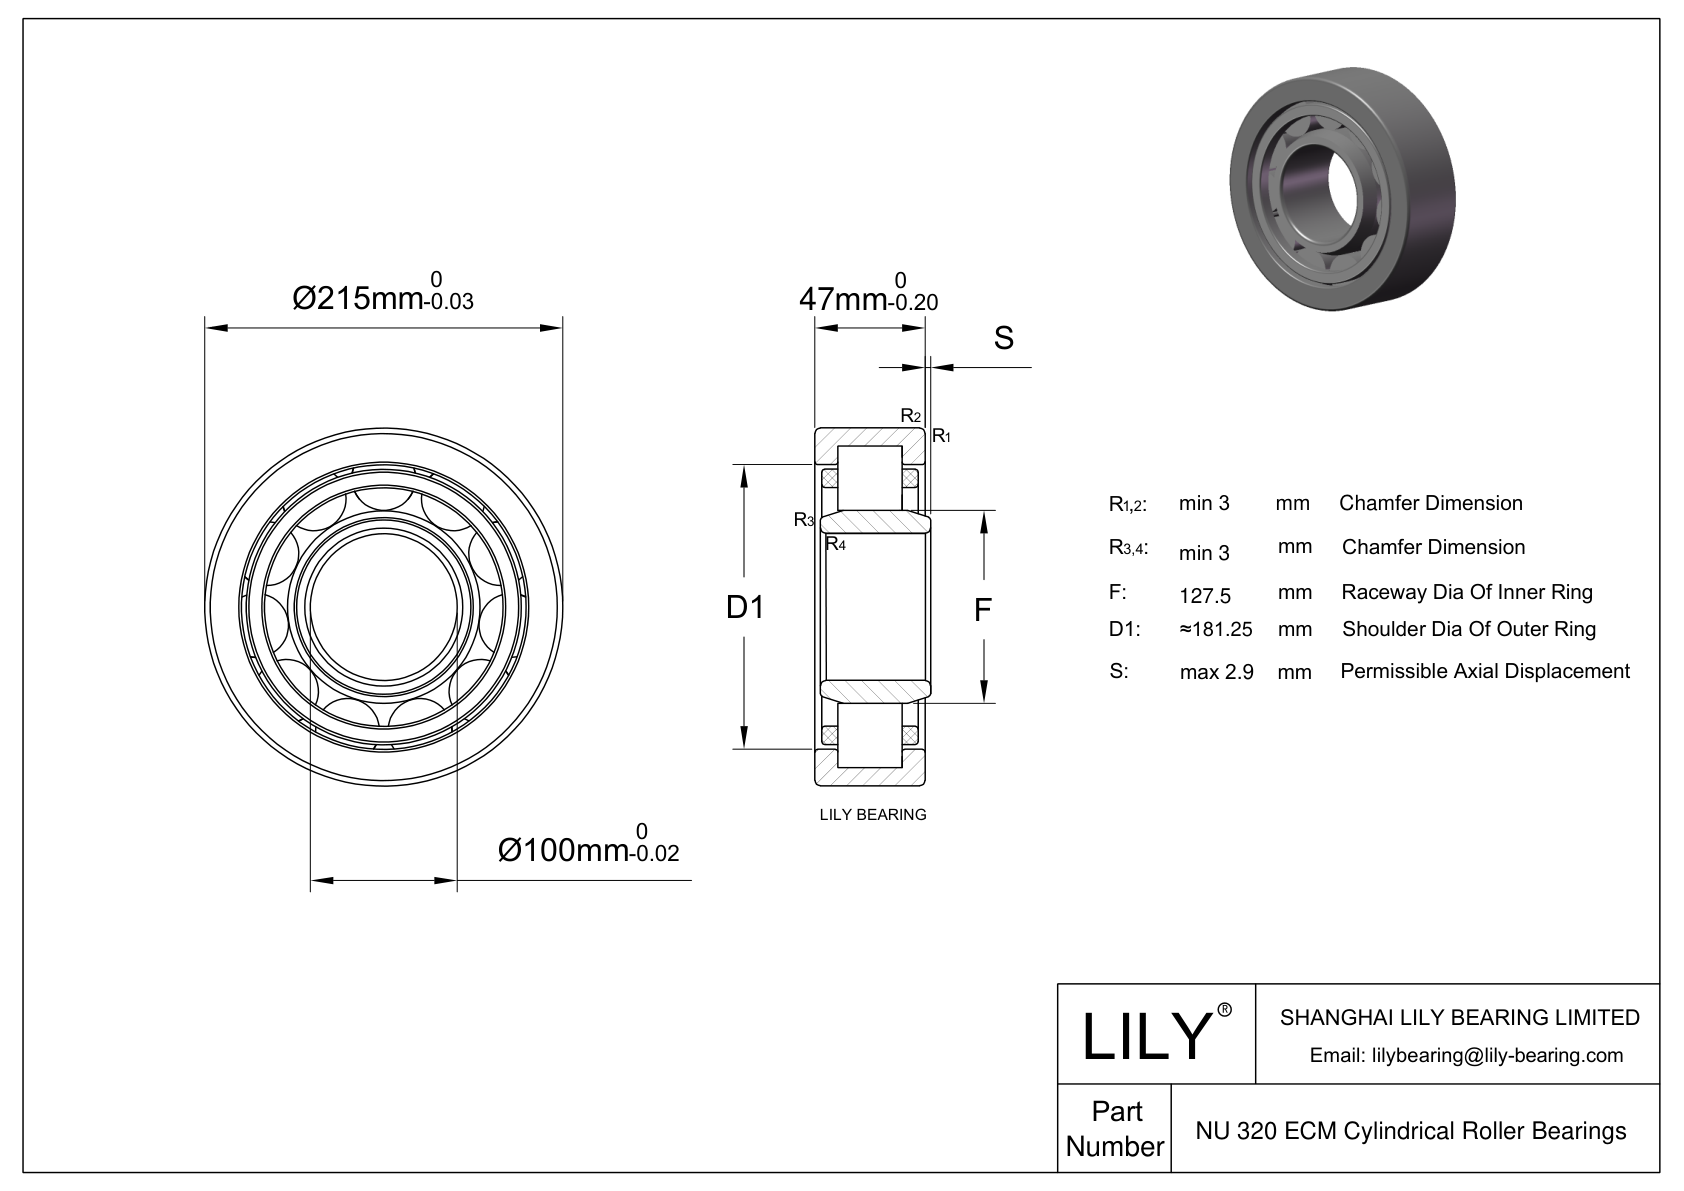 NU 320 ECM/C3VL0241 Ceramic Coated Cylindrical Roller Bearings cad drawing